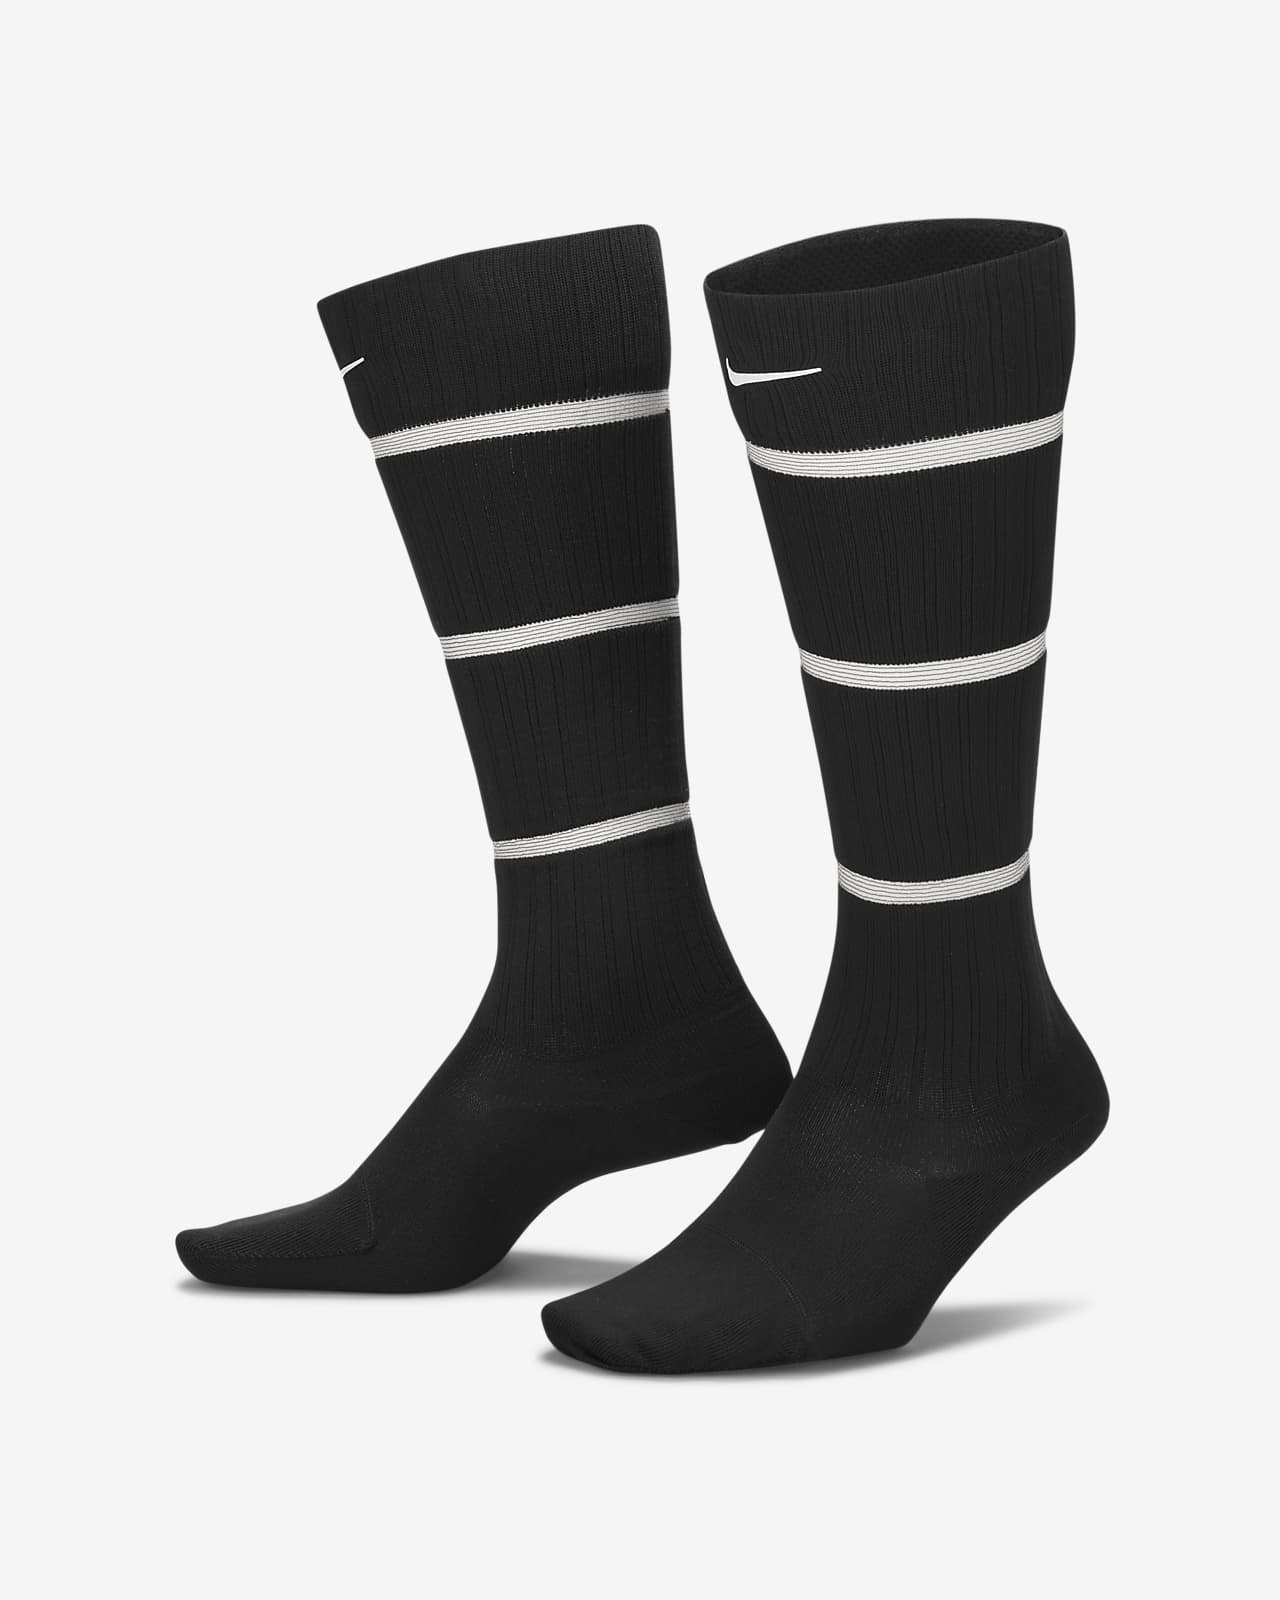 Chaussettes Nike femme